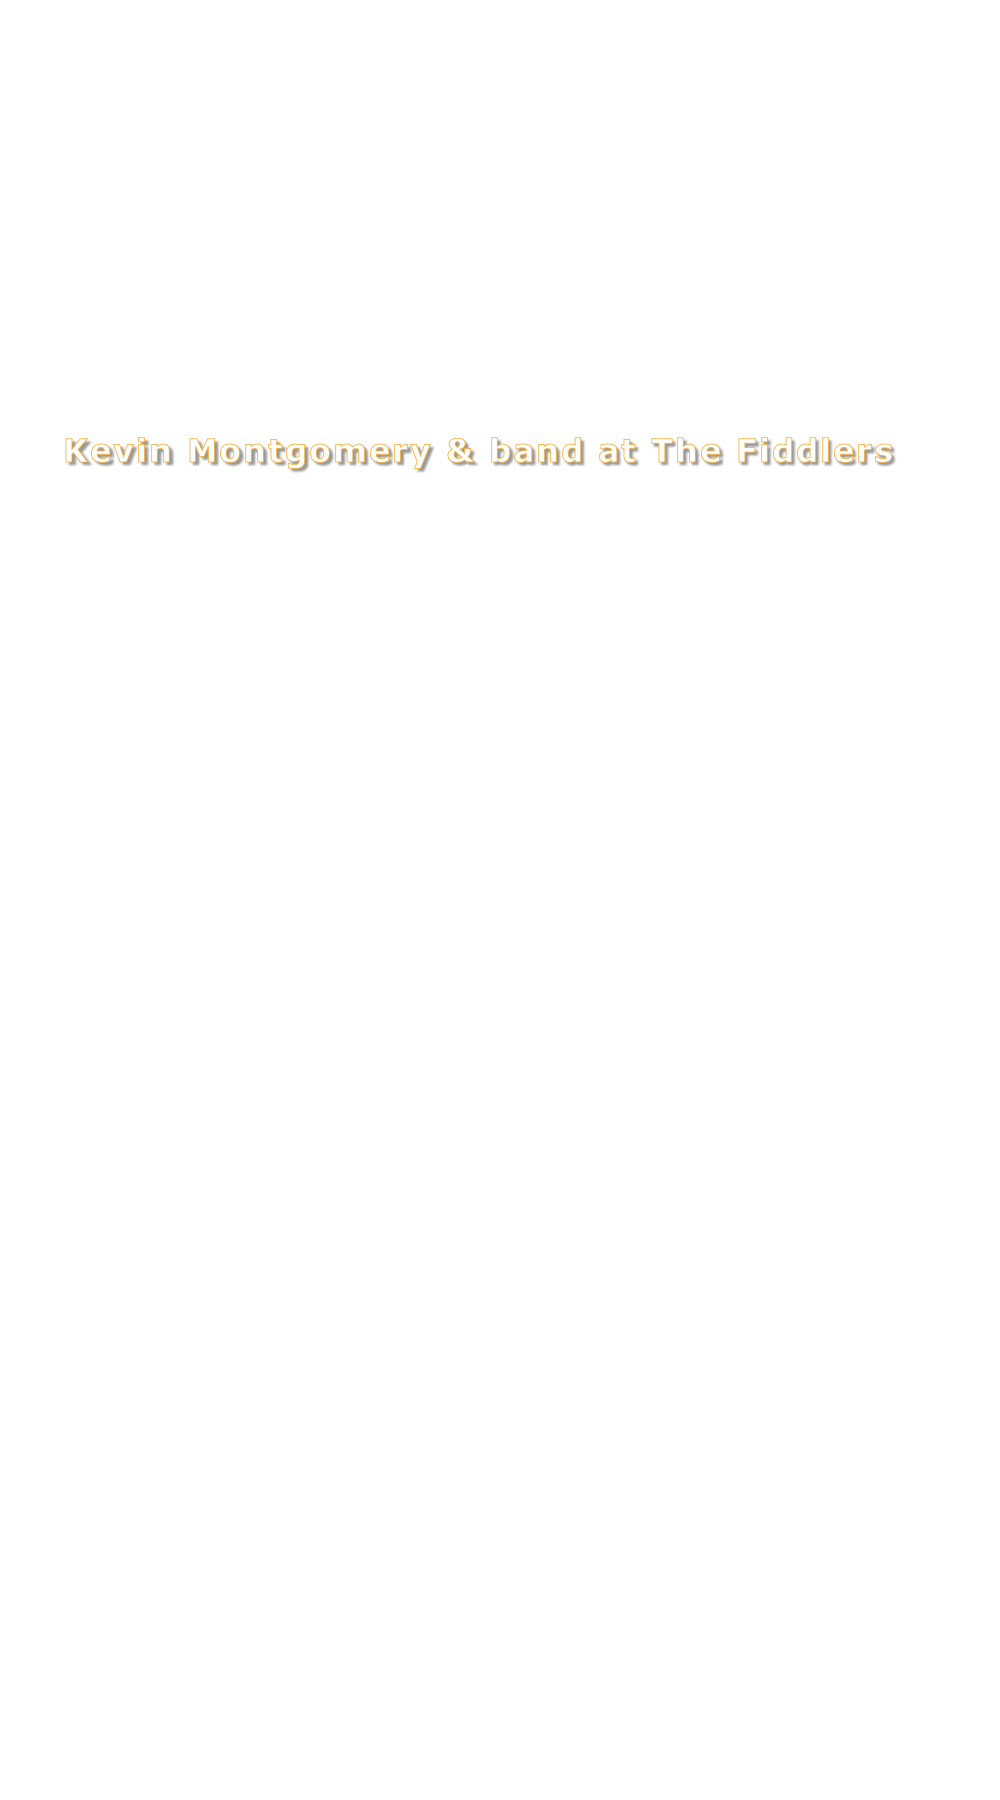 Kevin Montgomery & band at The Fiddlers